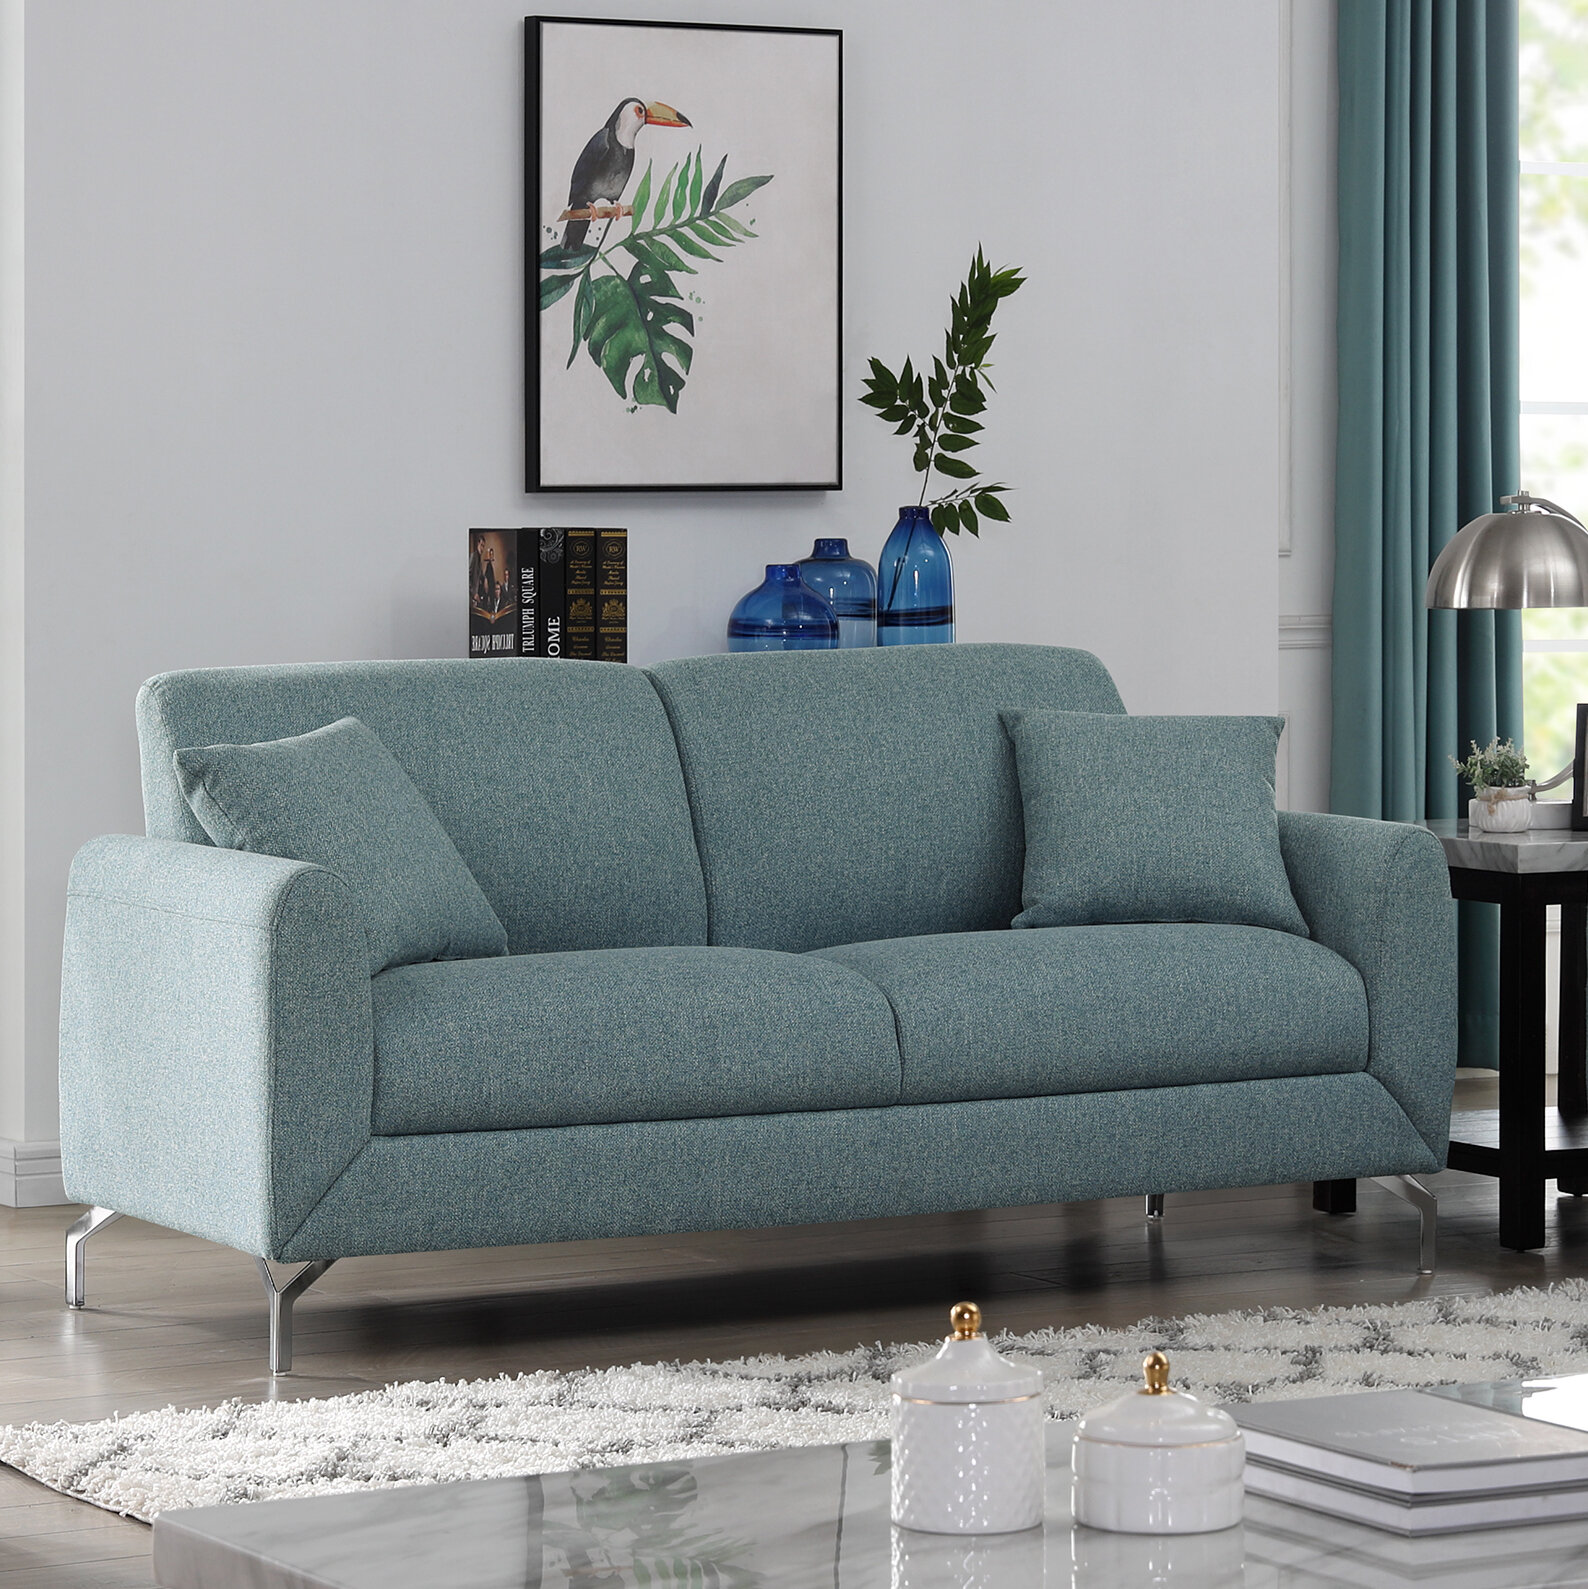 East Side Teal Blue,Green Chenille Fabric Chaise Sofa - Rooms To Go